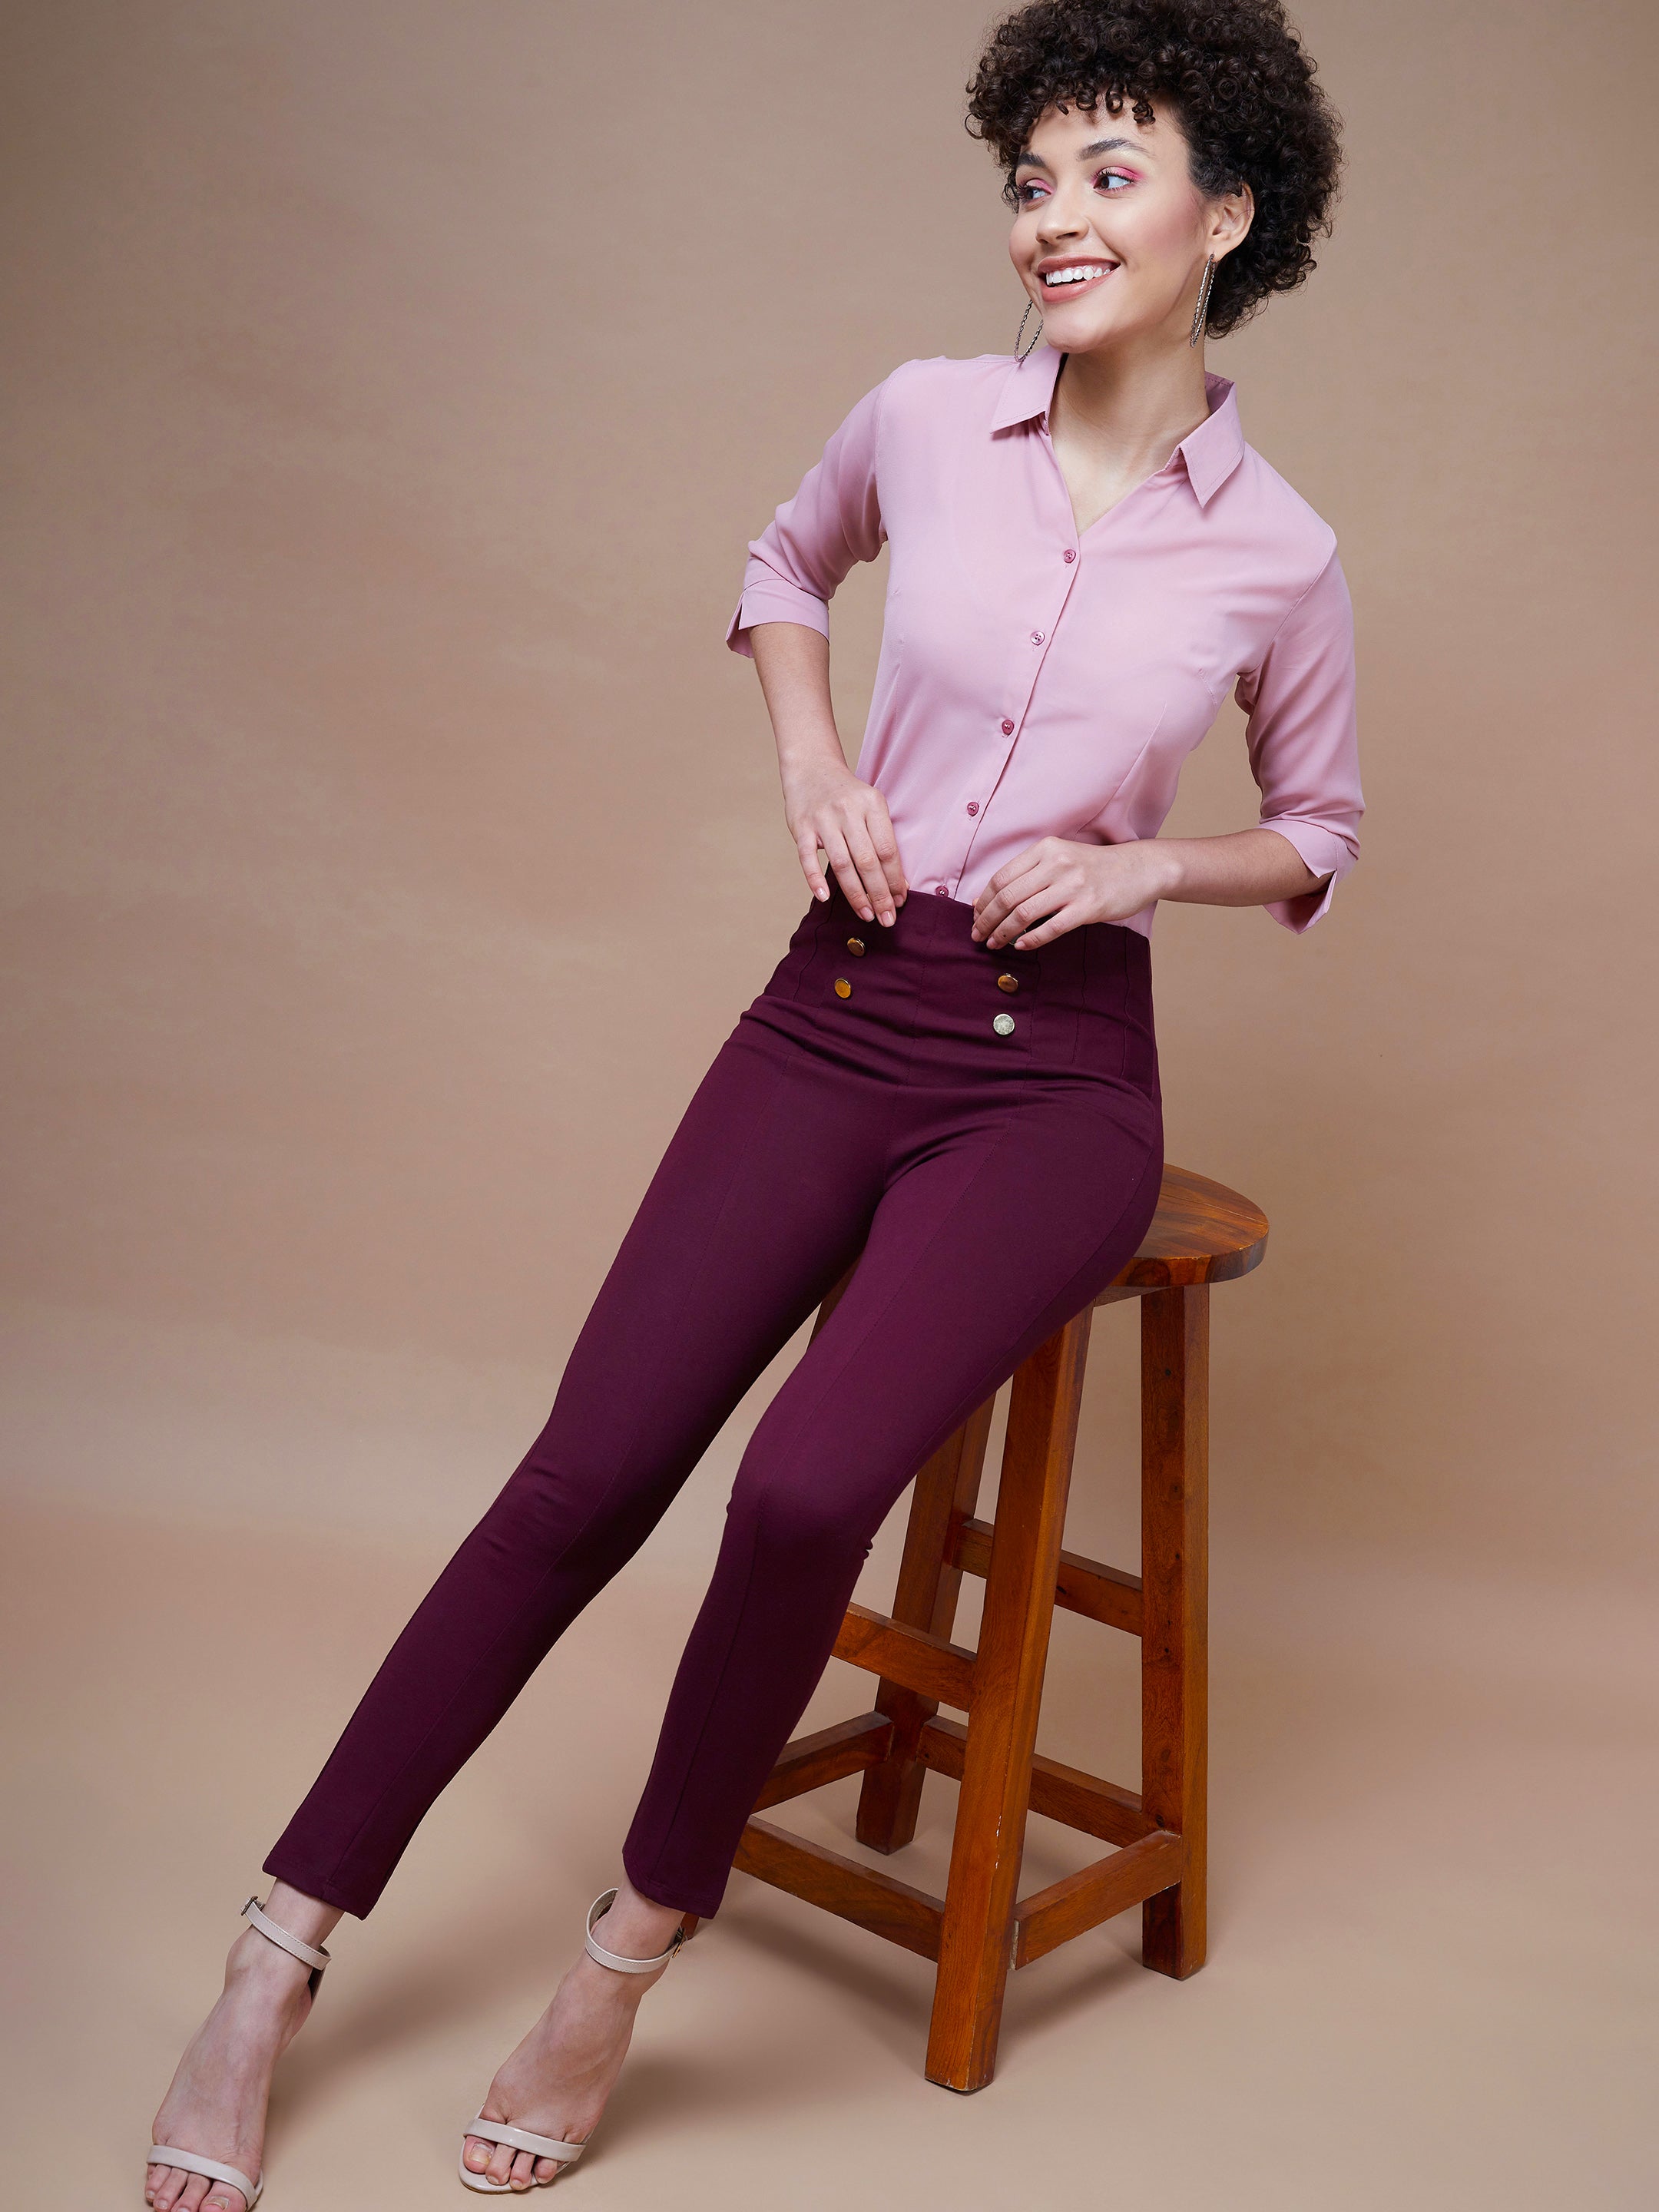 Buy Lyush Women Burgundy Show Button Jeggings Online at Best Price